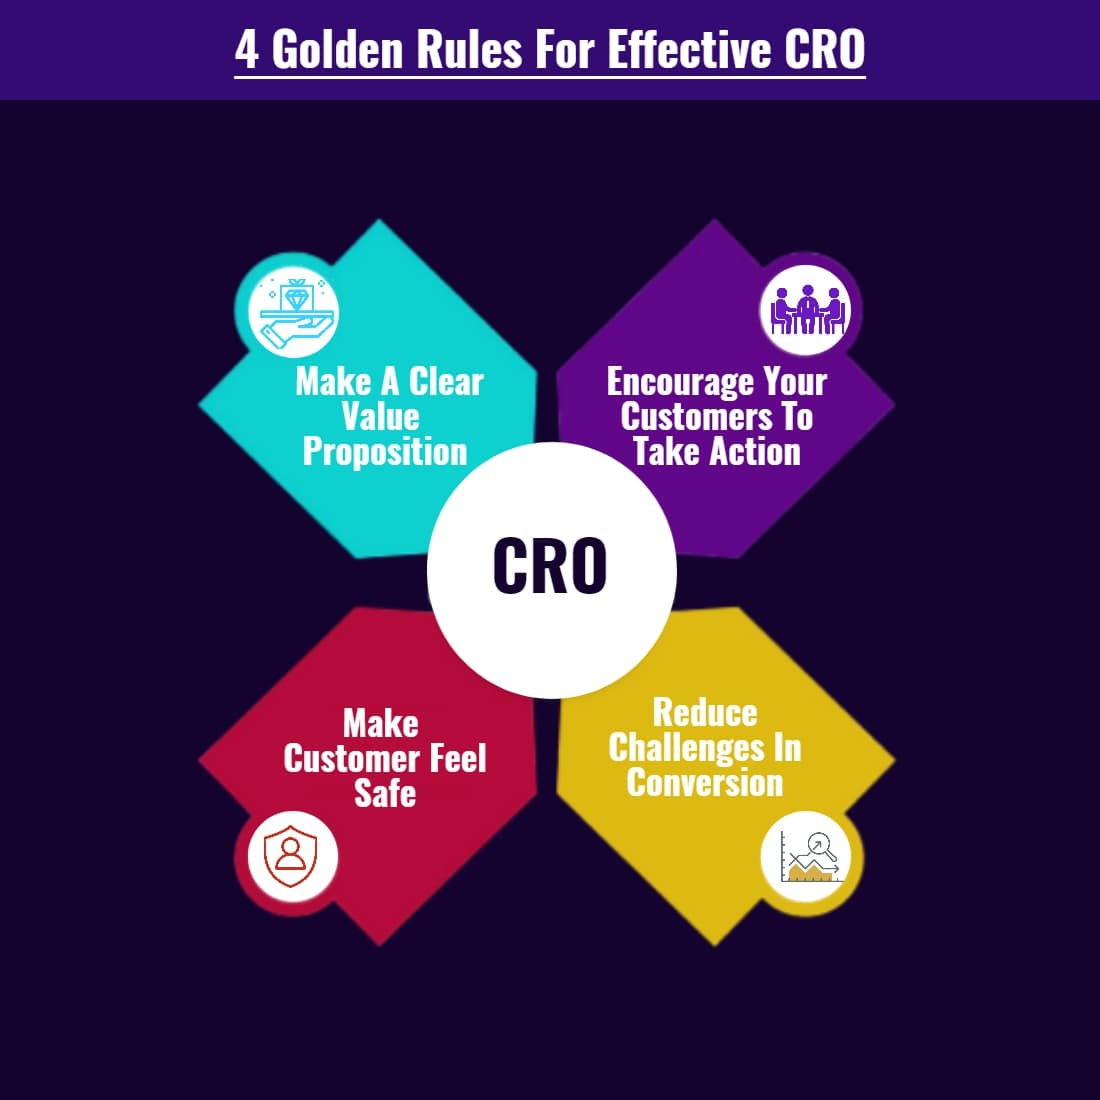 4-Golden-Rules-For-Effective-CRO (1)